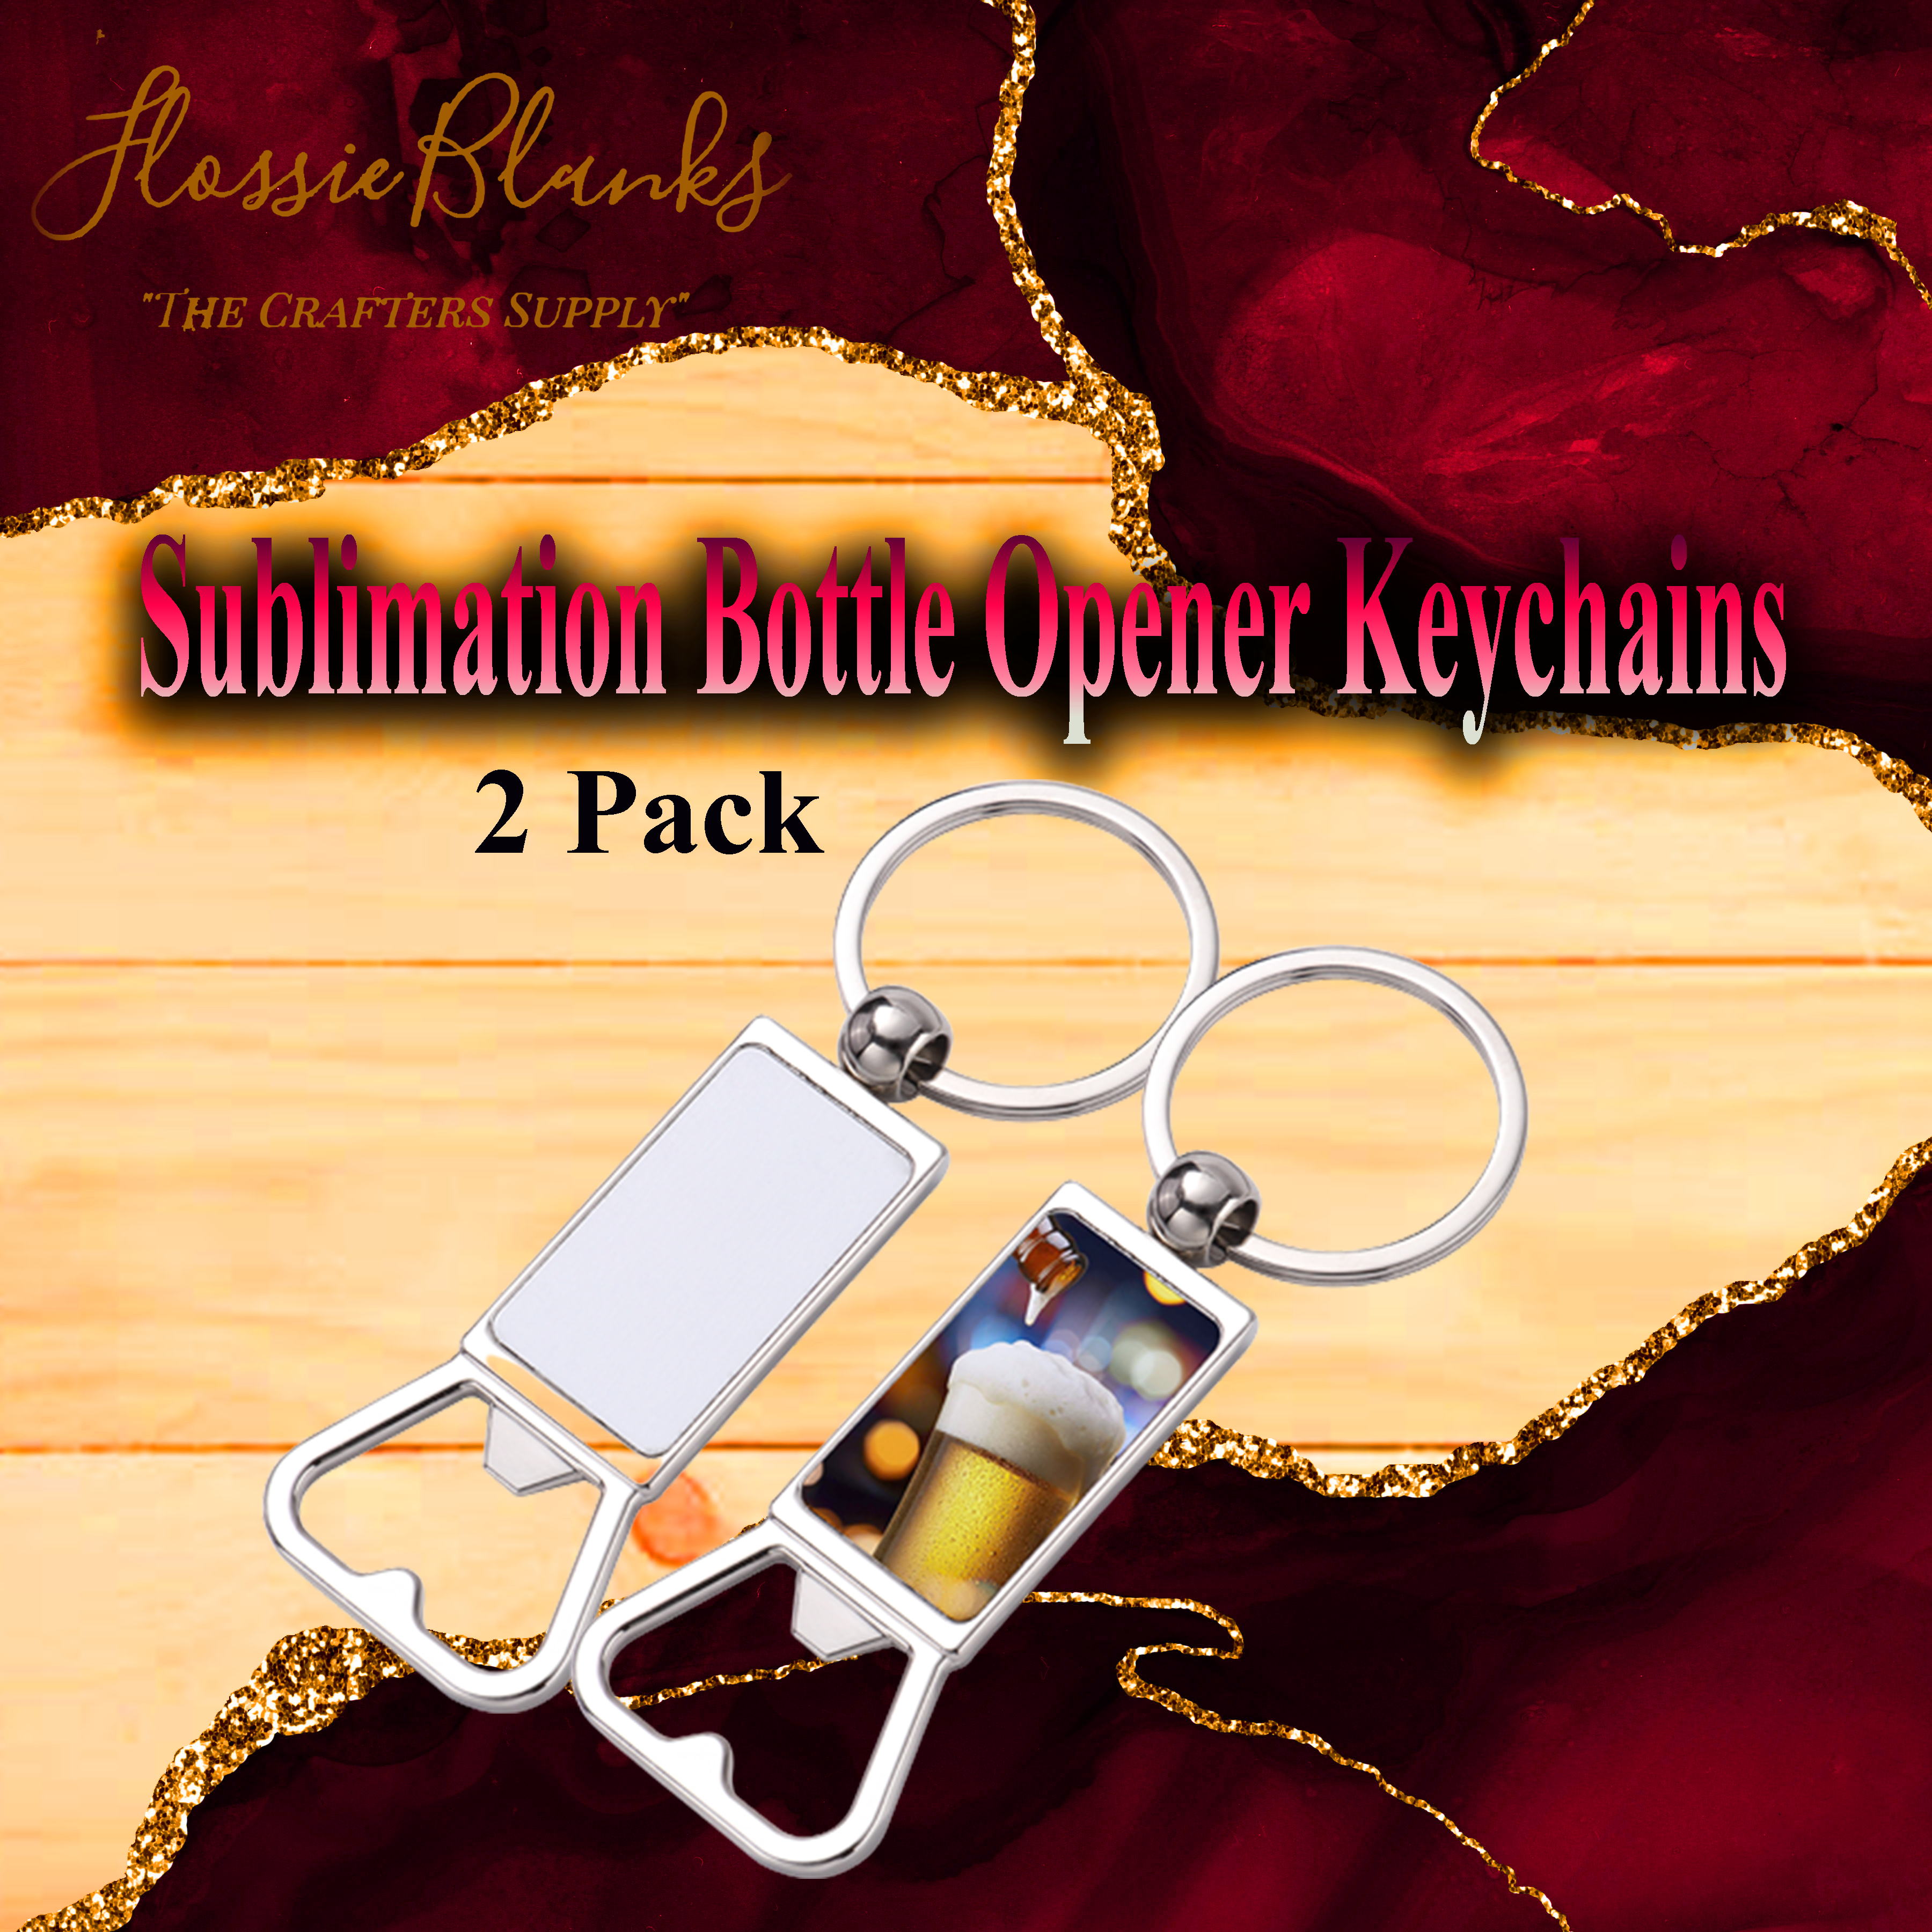 Bottle Opener Keychains Sublimation (BLANK) 2 Pack – Flossie Blanks